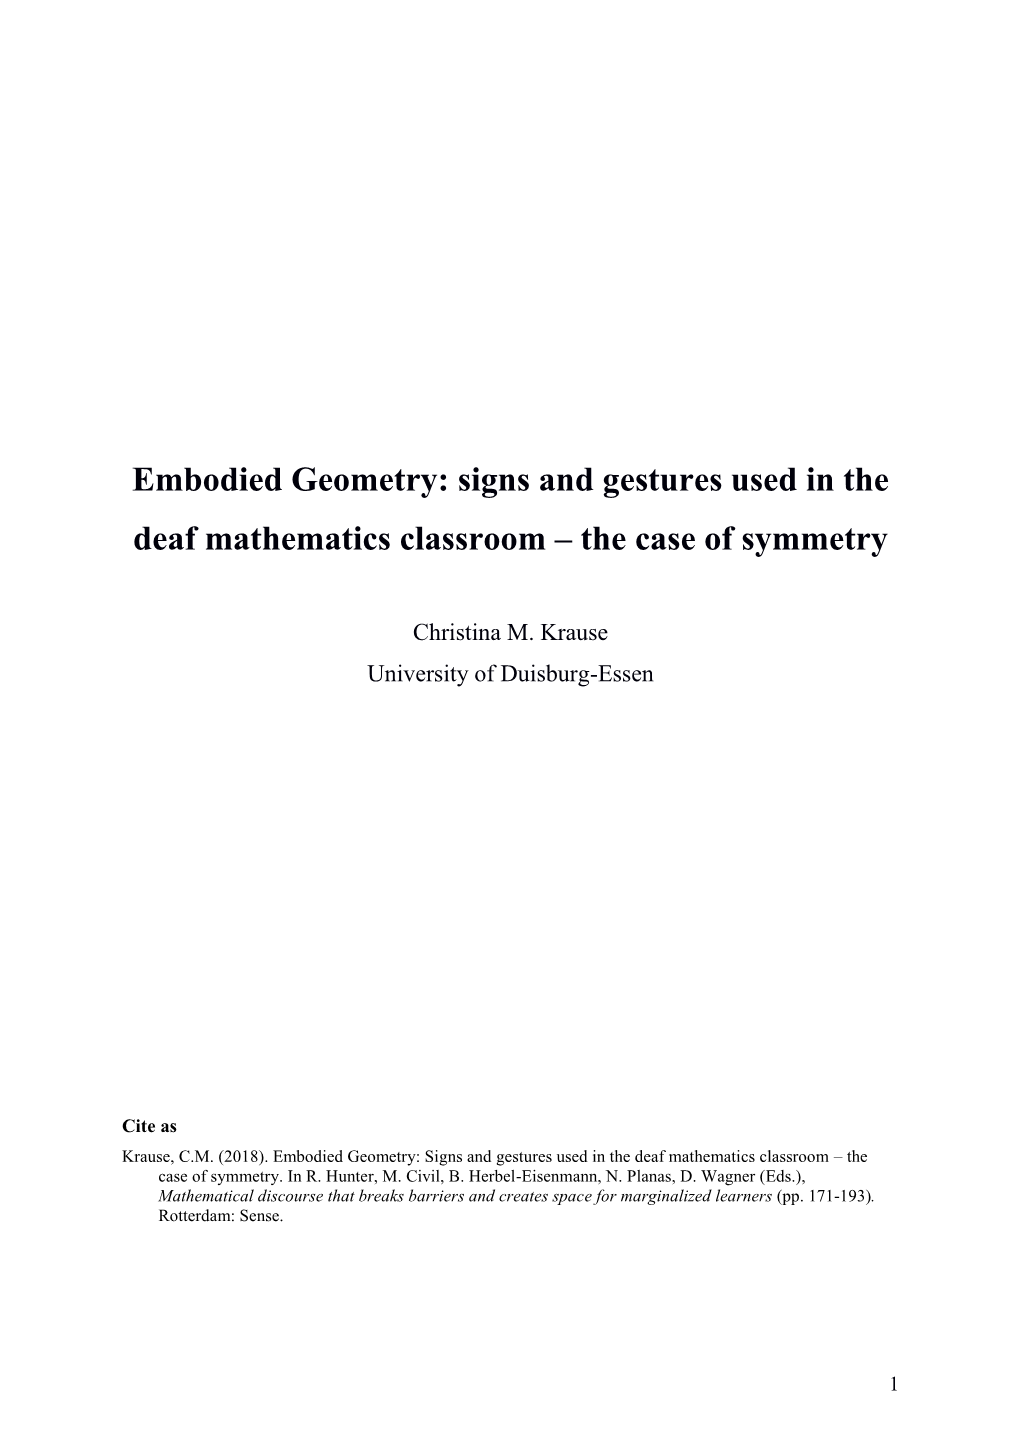 Embodied Geometry: Signs and Gestures Used in the Deaf Mathematics Classroom – the Case of Symmetry